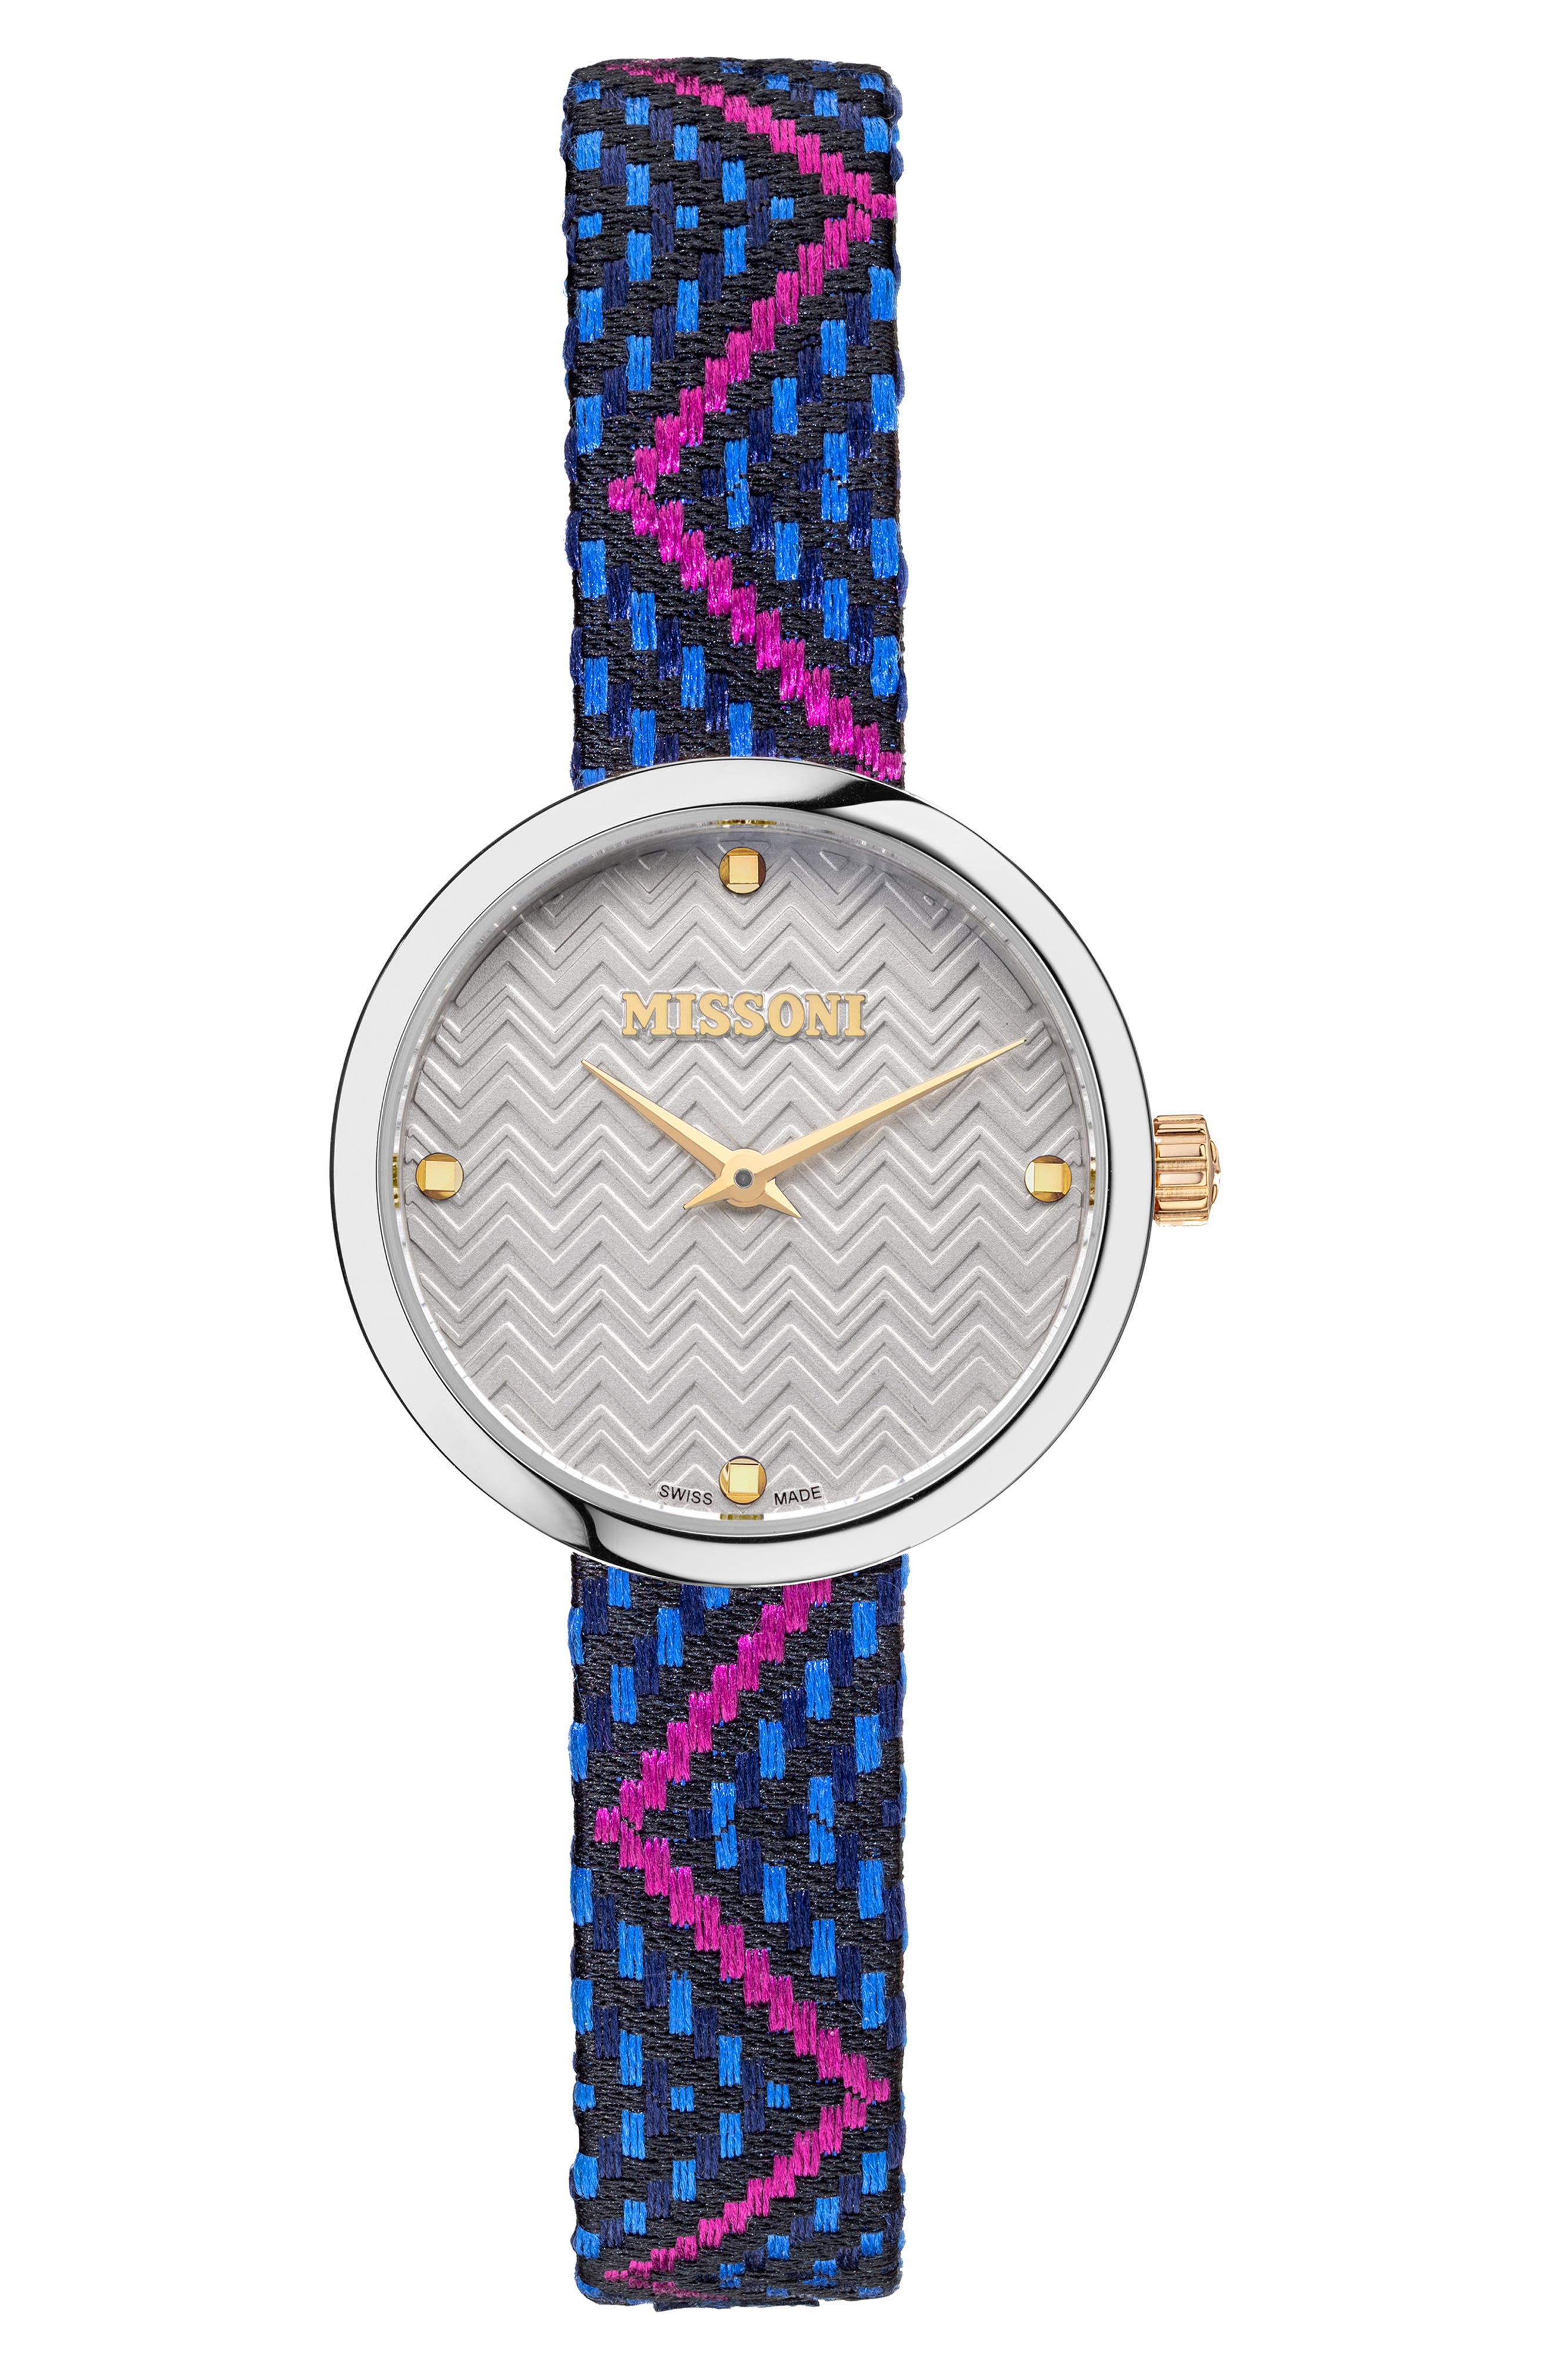 Missoni M1 Zigzag Jacquard Textile Strap Watch, 29mm in Stainless Steel at Nordstrom